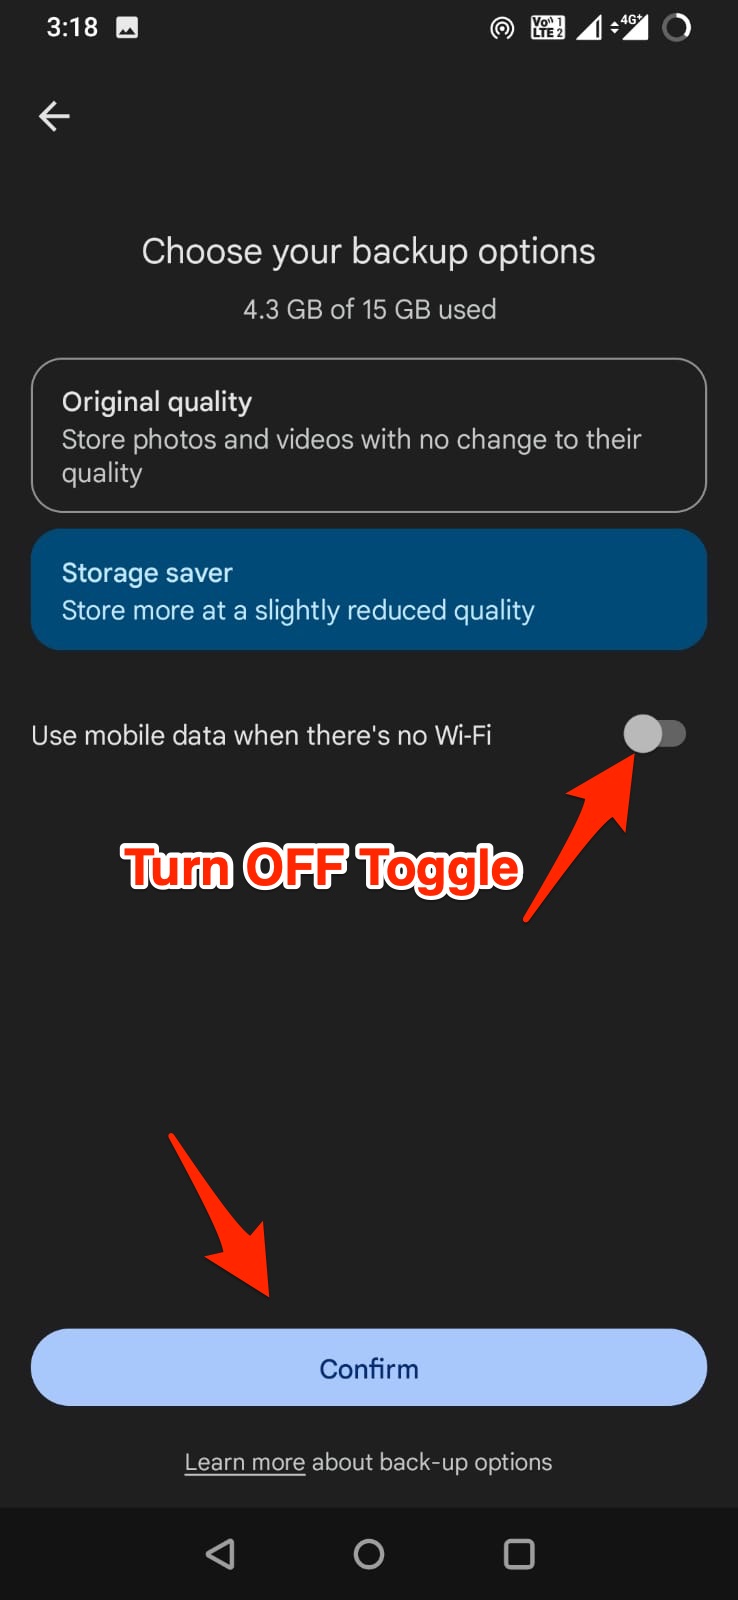 Turn_OFF_Use_Mobile_Data_When_No_WiFi